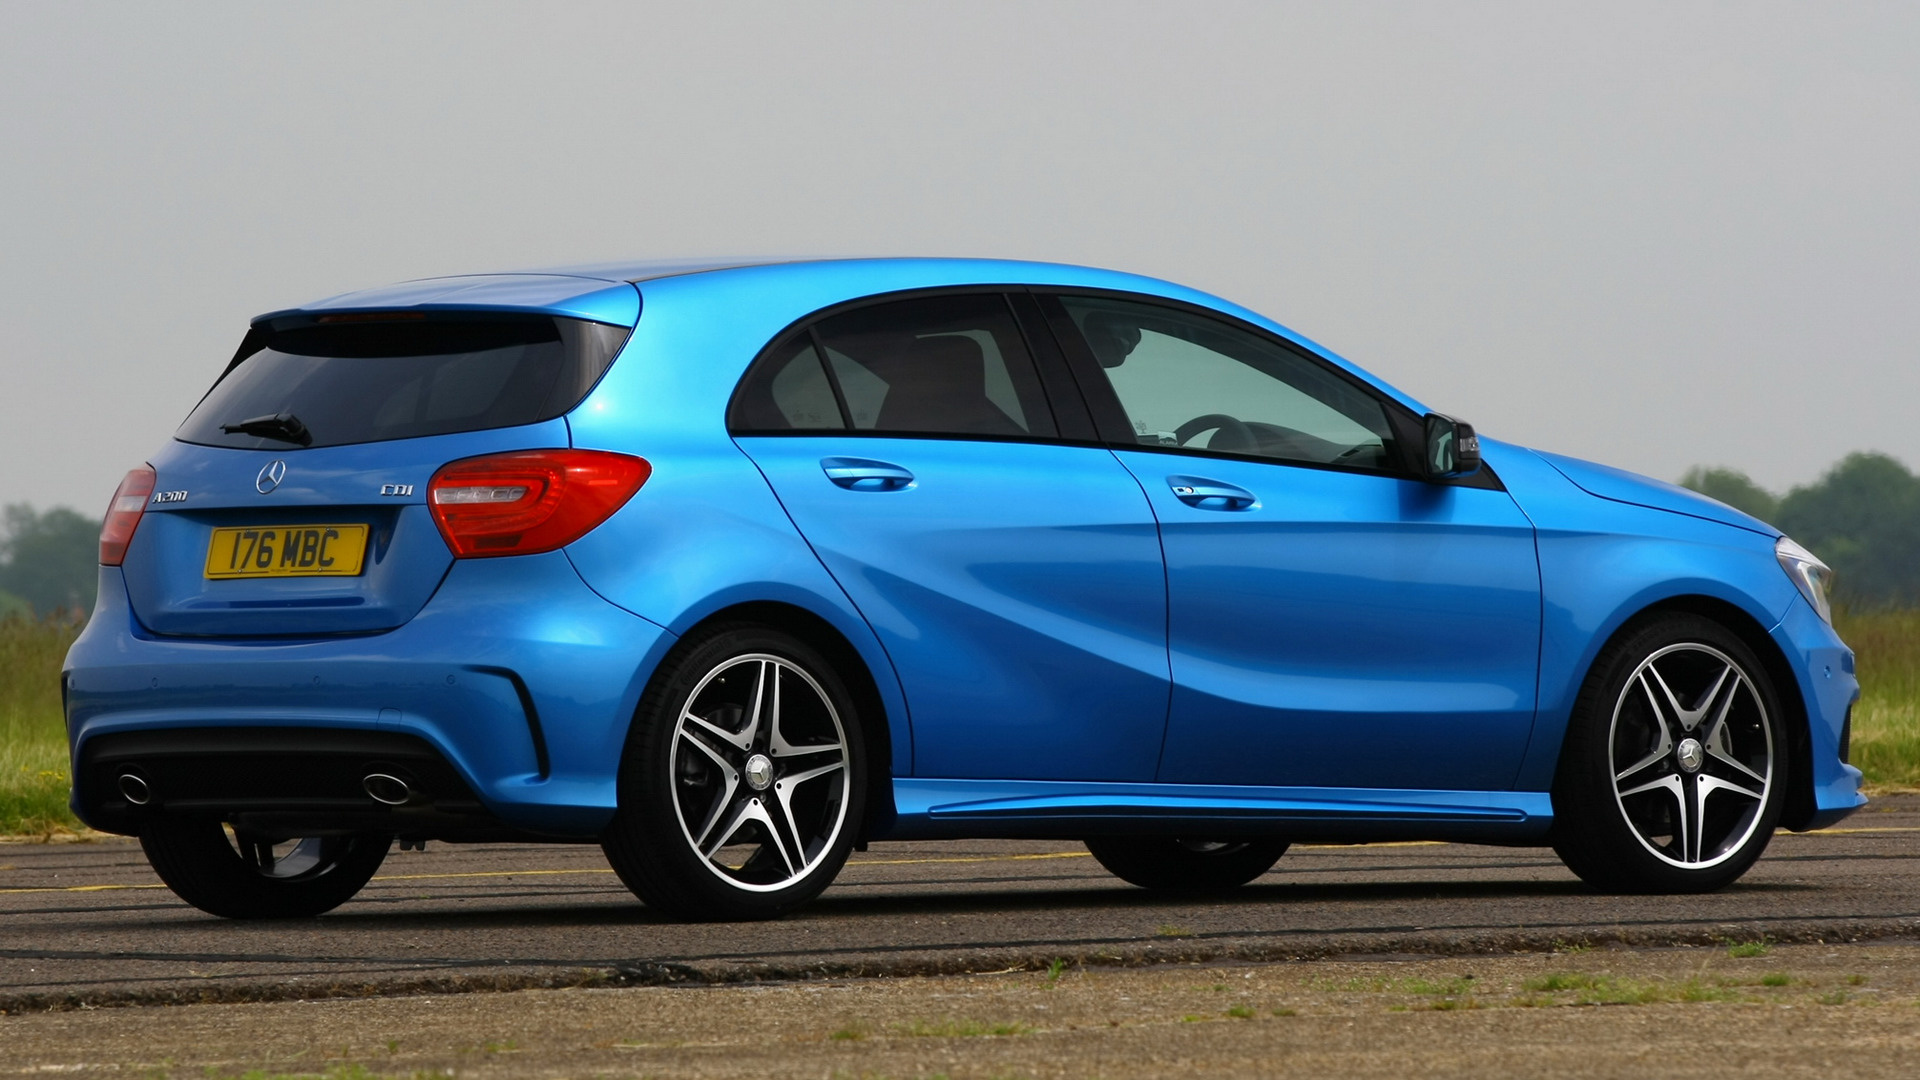 2012 Mercedes-Benz A-Class AMG Sport (UK) - Wallpapers and ...